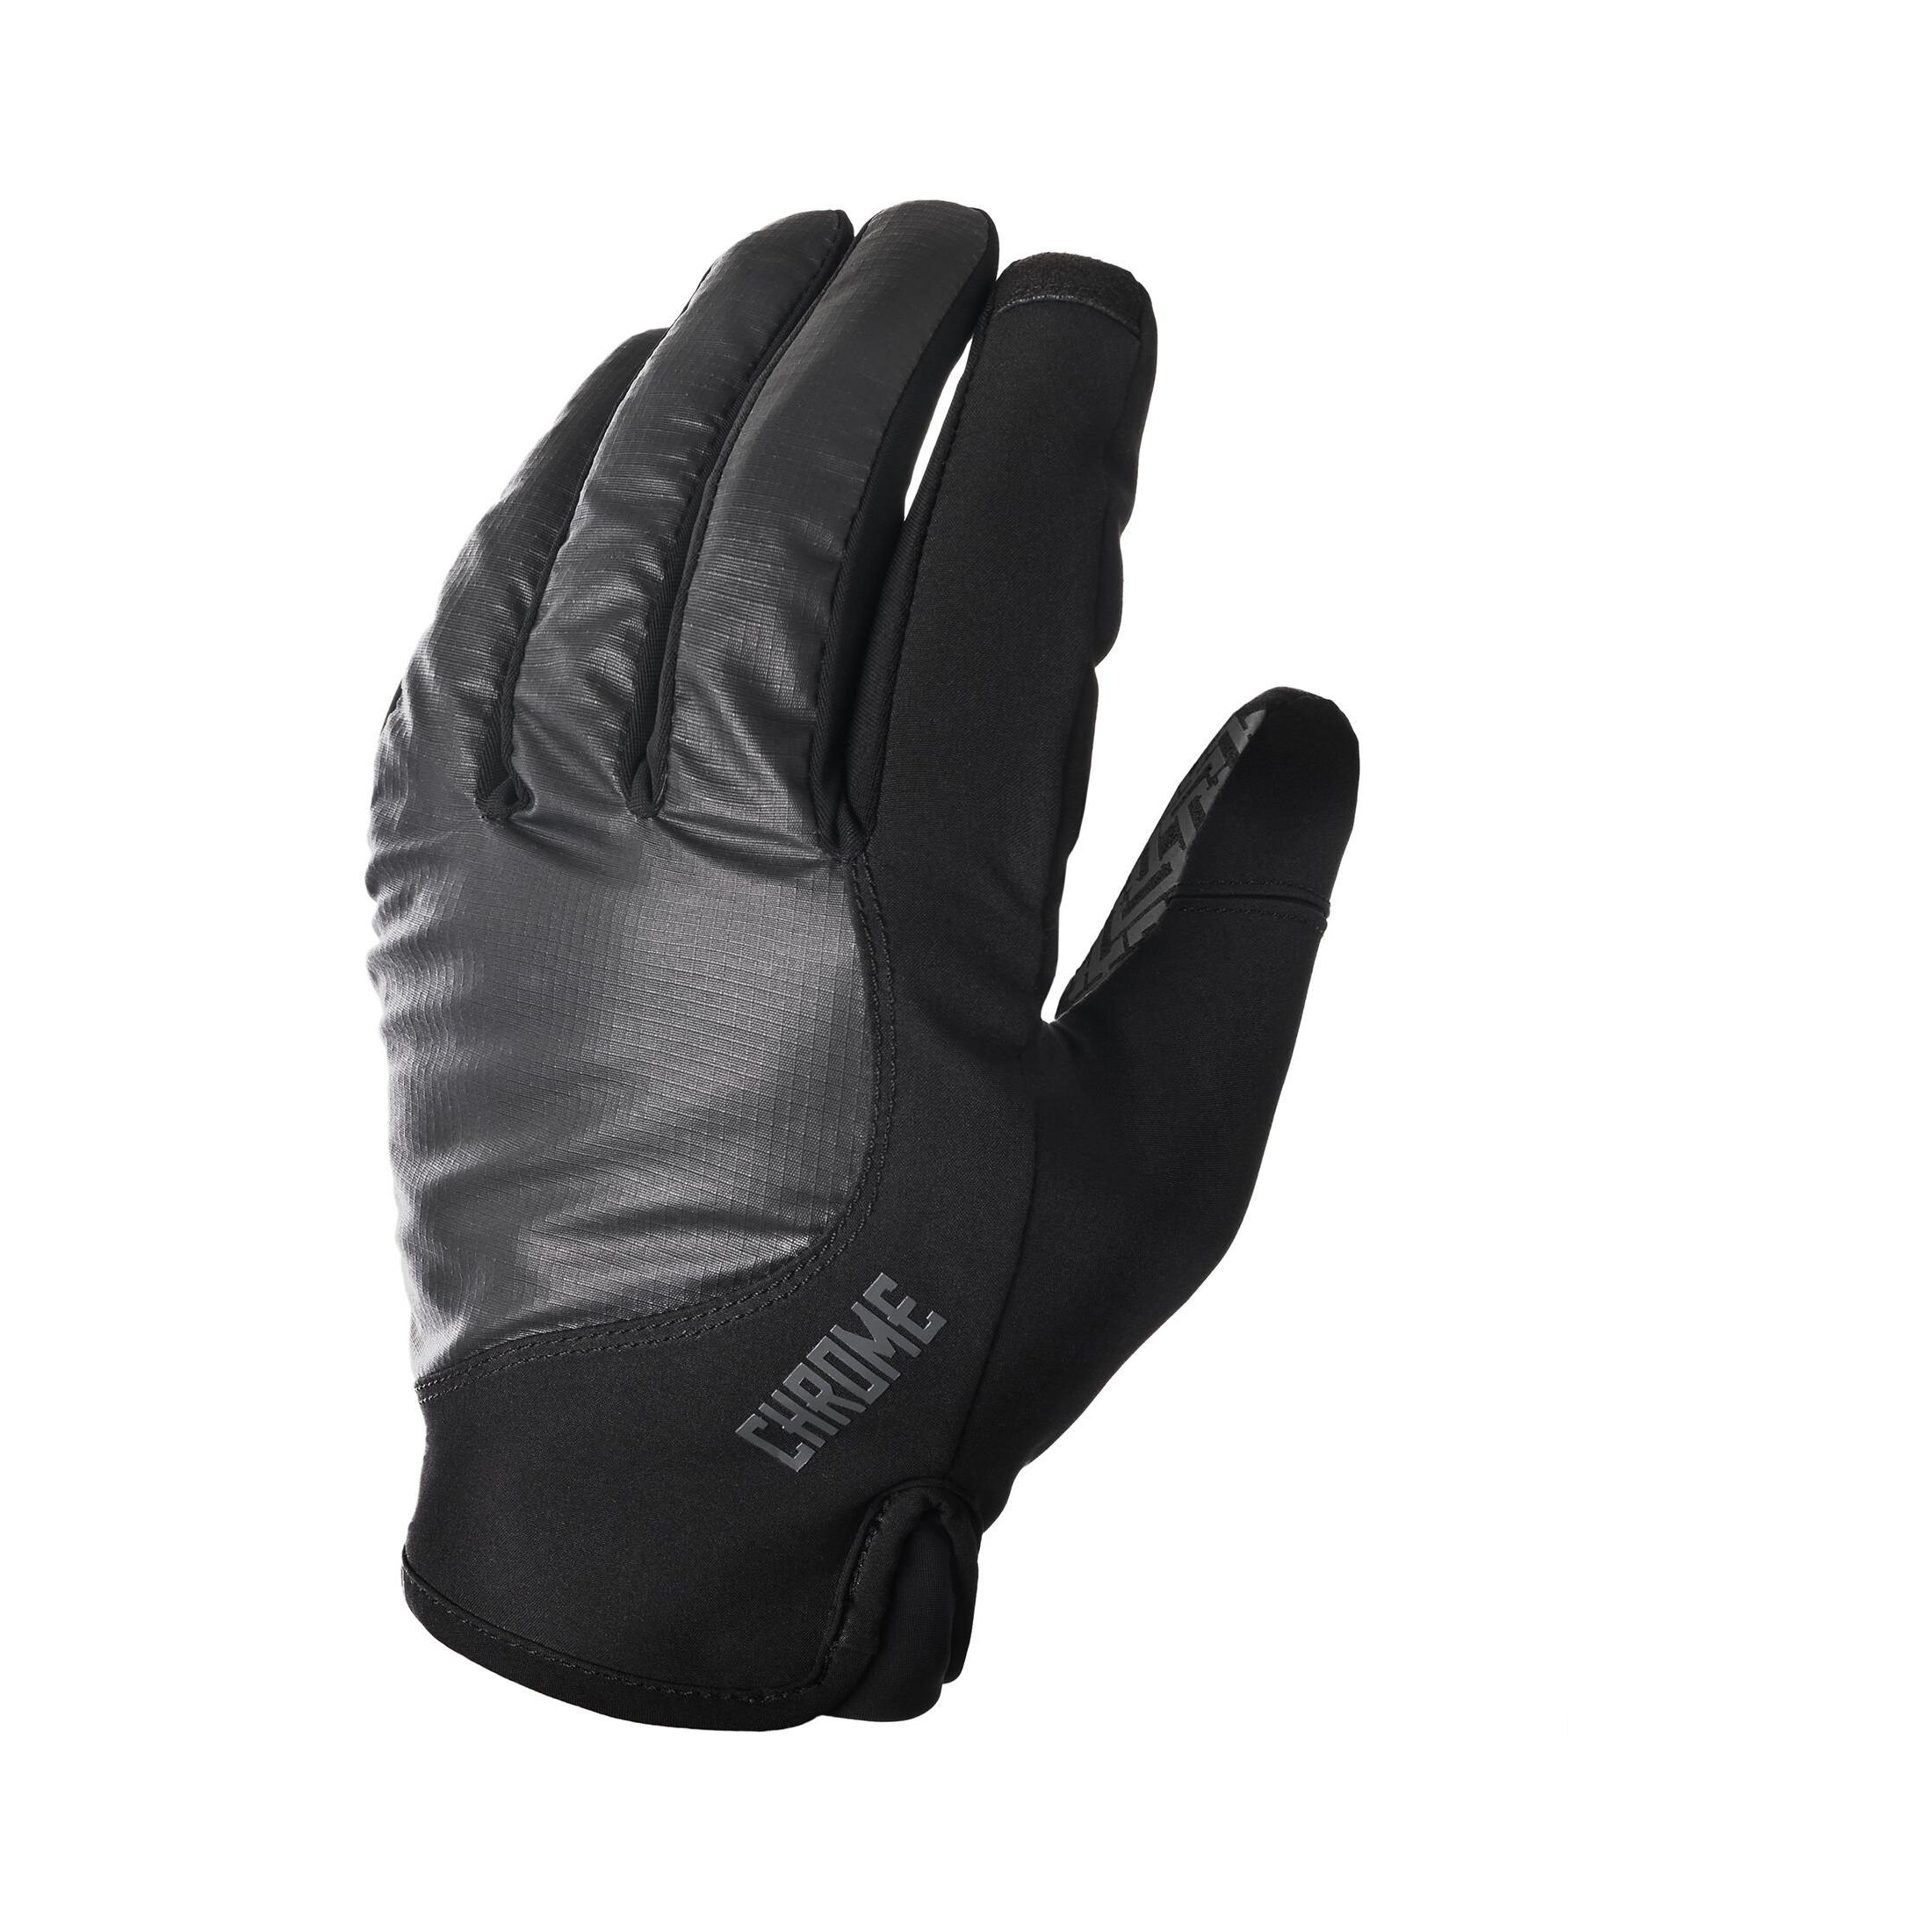 Chrome MIDWEIGHT CYCLE GLOVES Black Noir M 